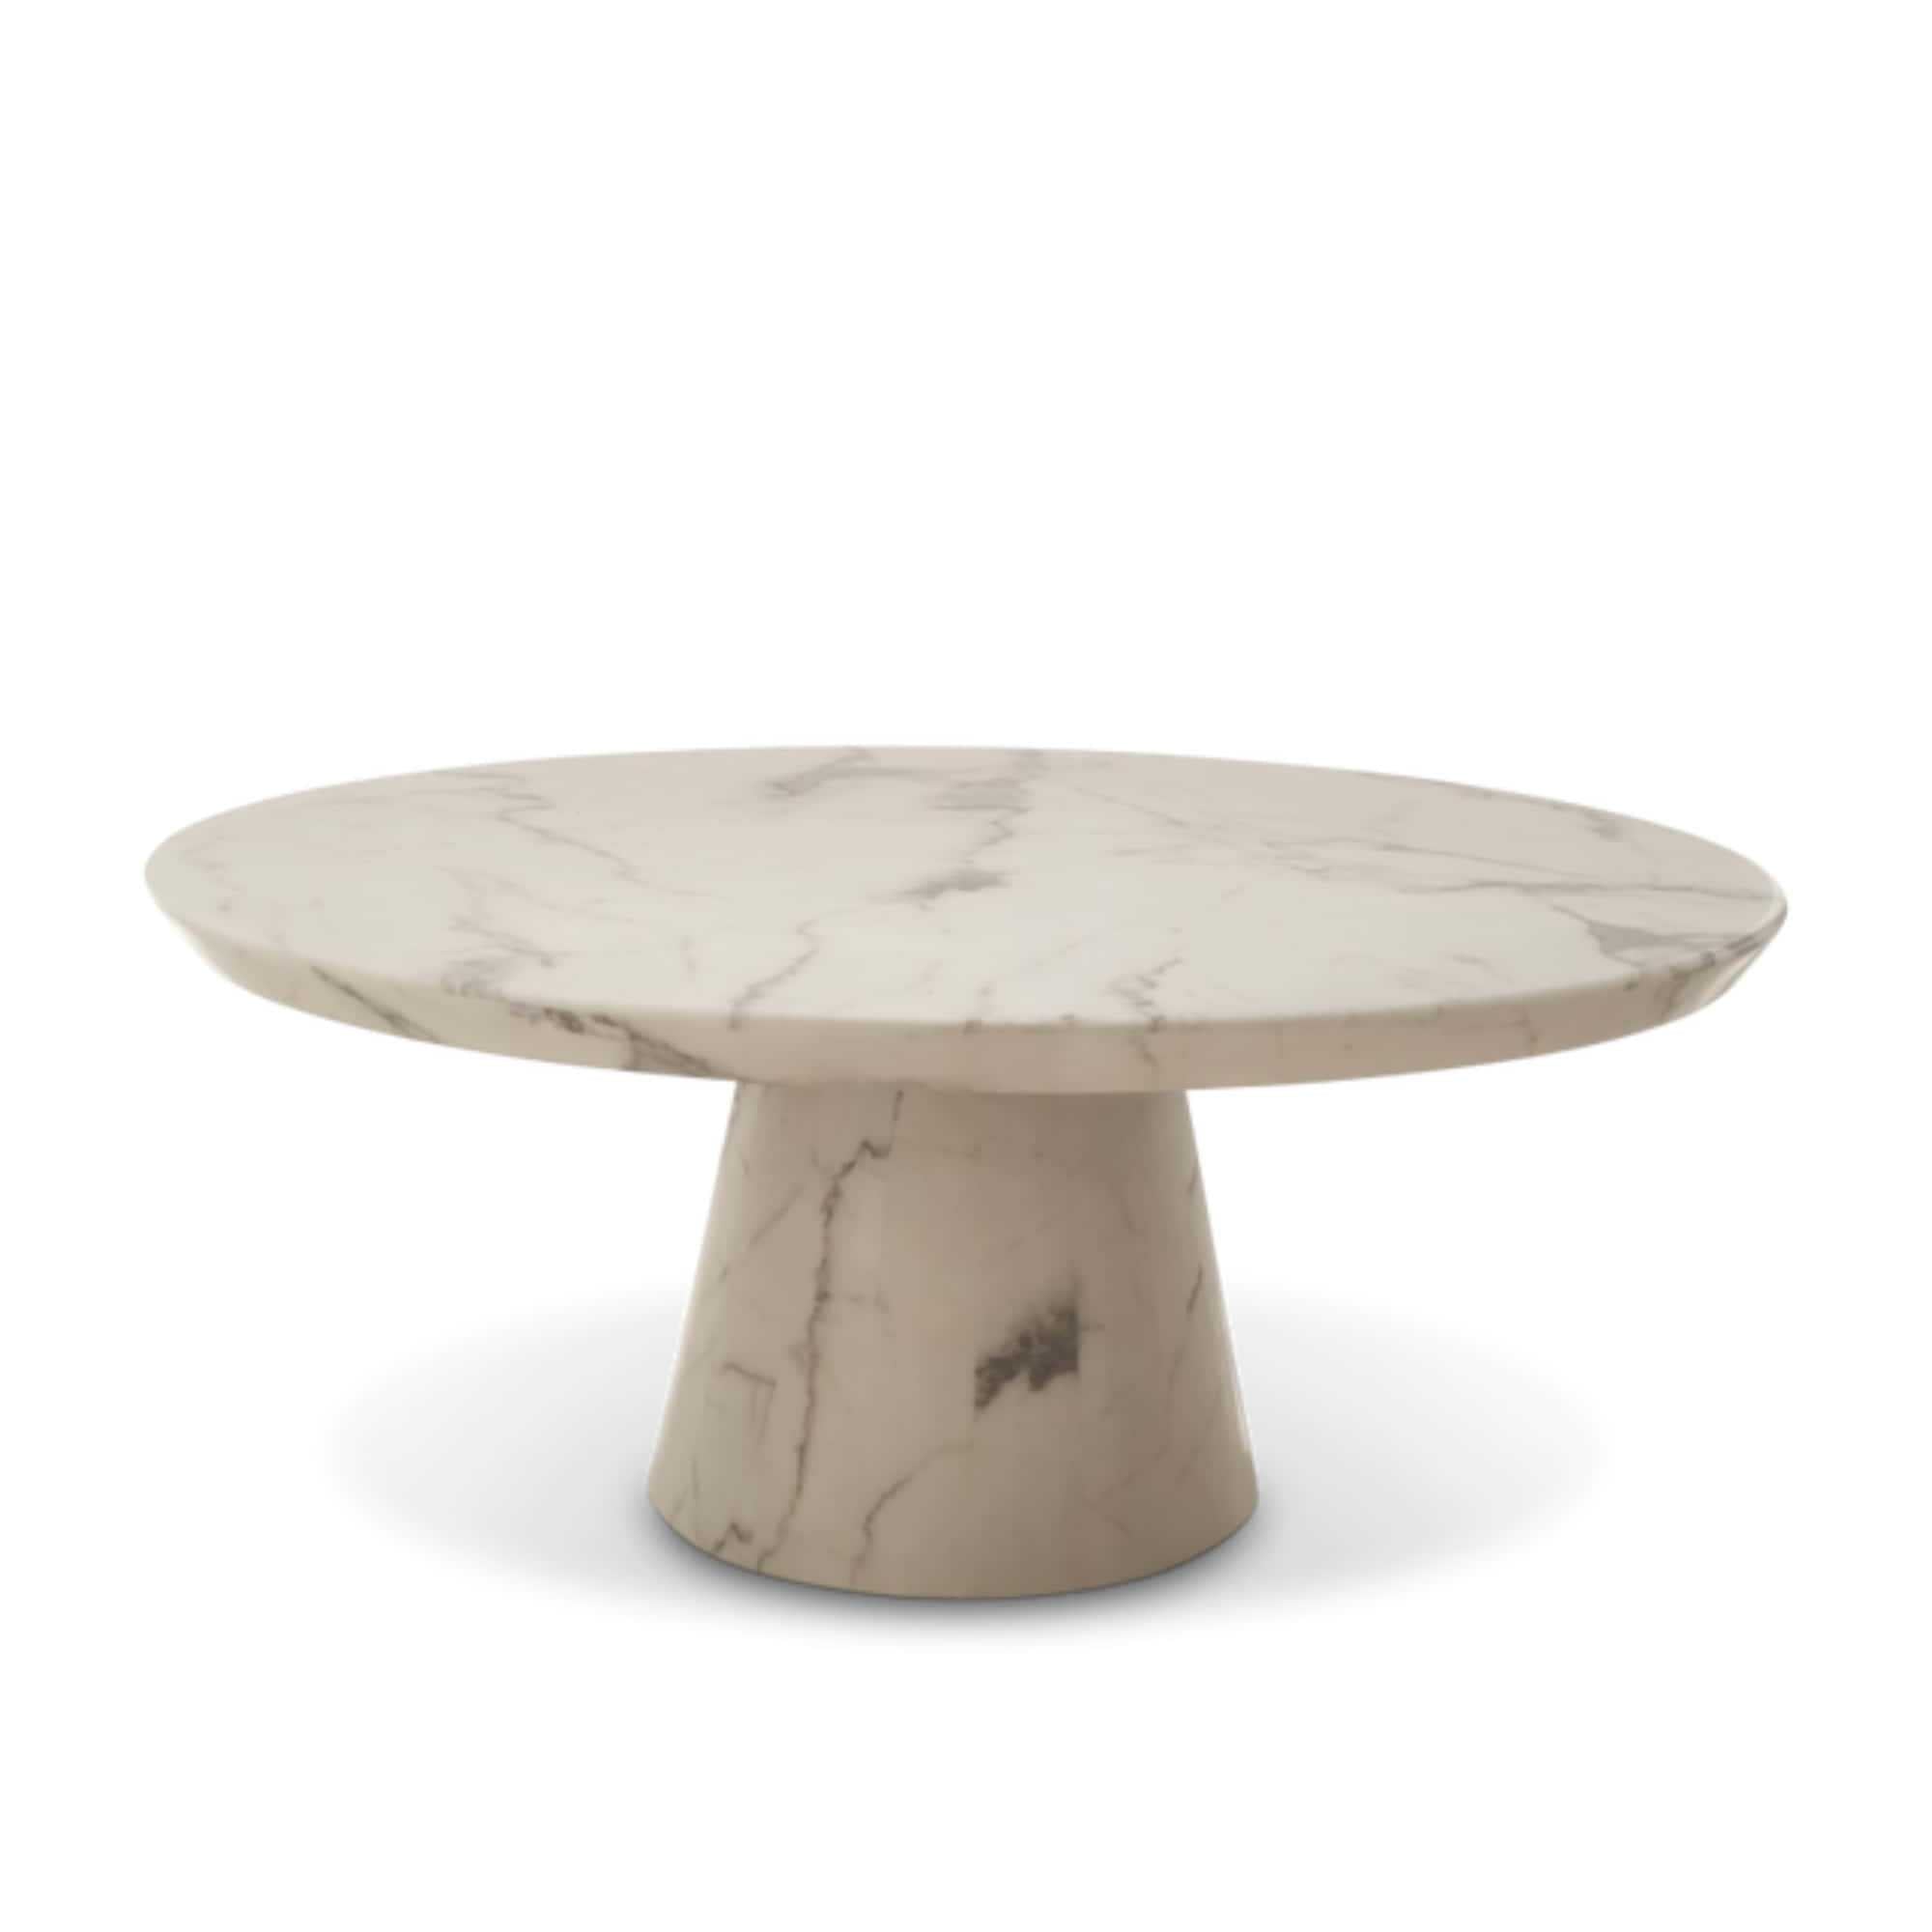 Pols Potten Disc Marble Look Coffee Table, White (Ø100cm)